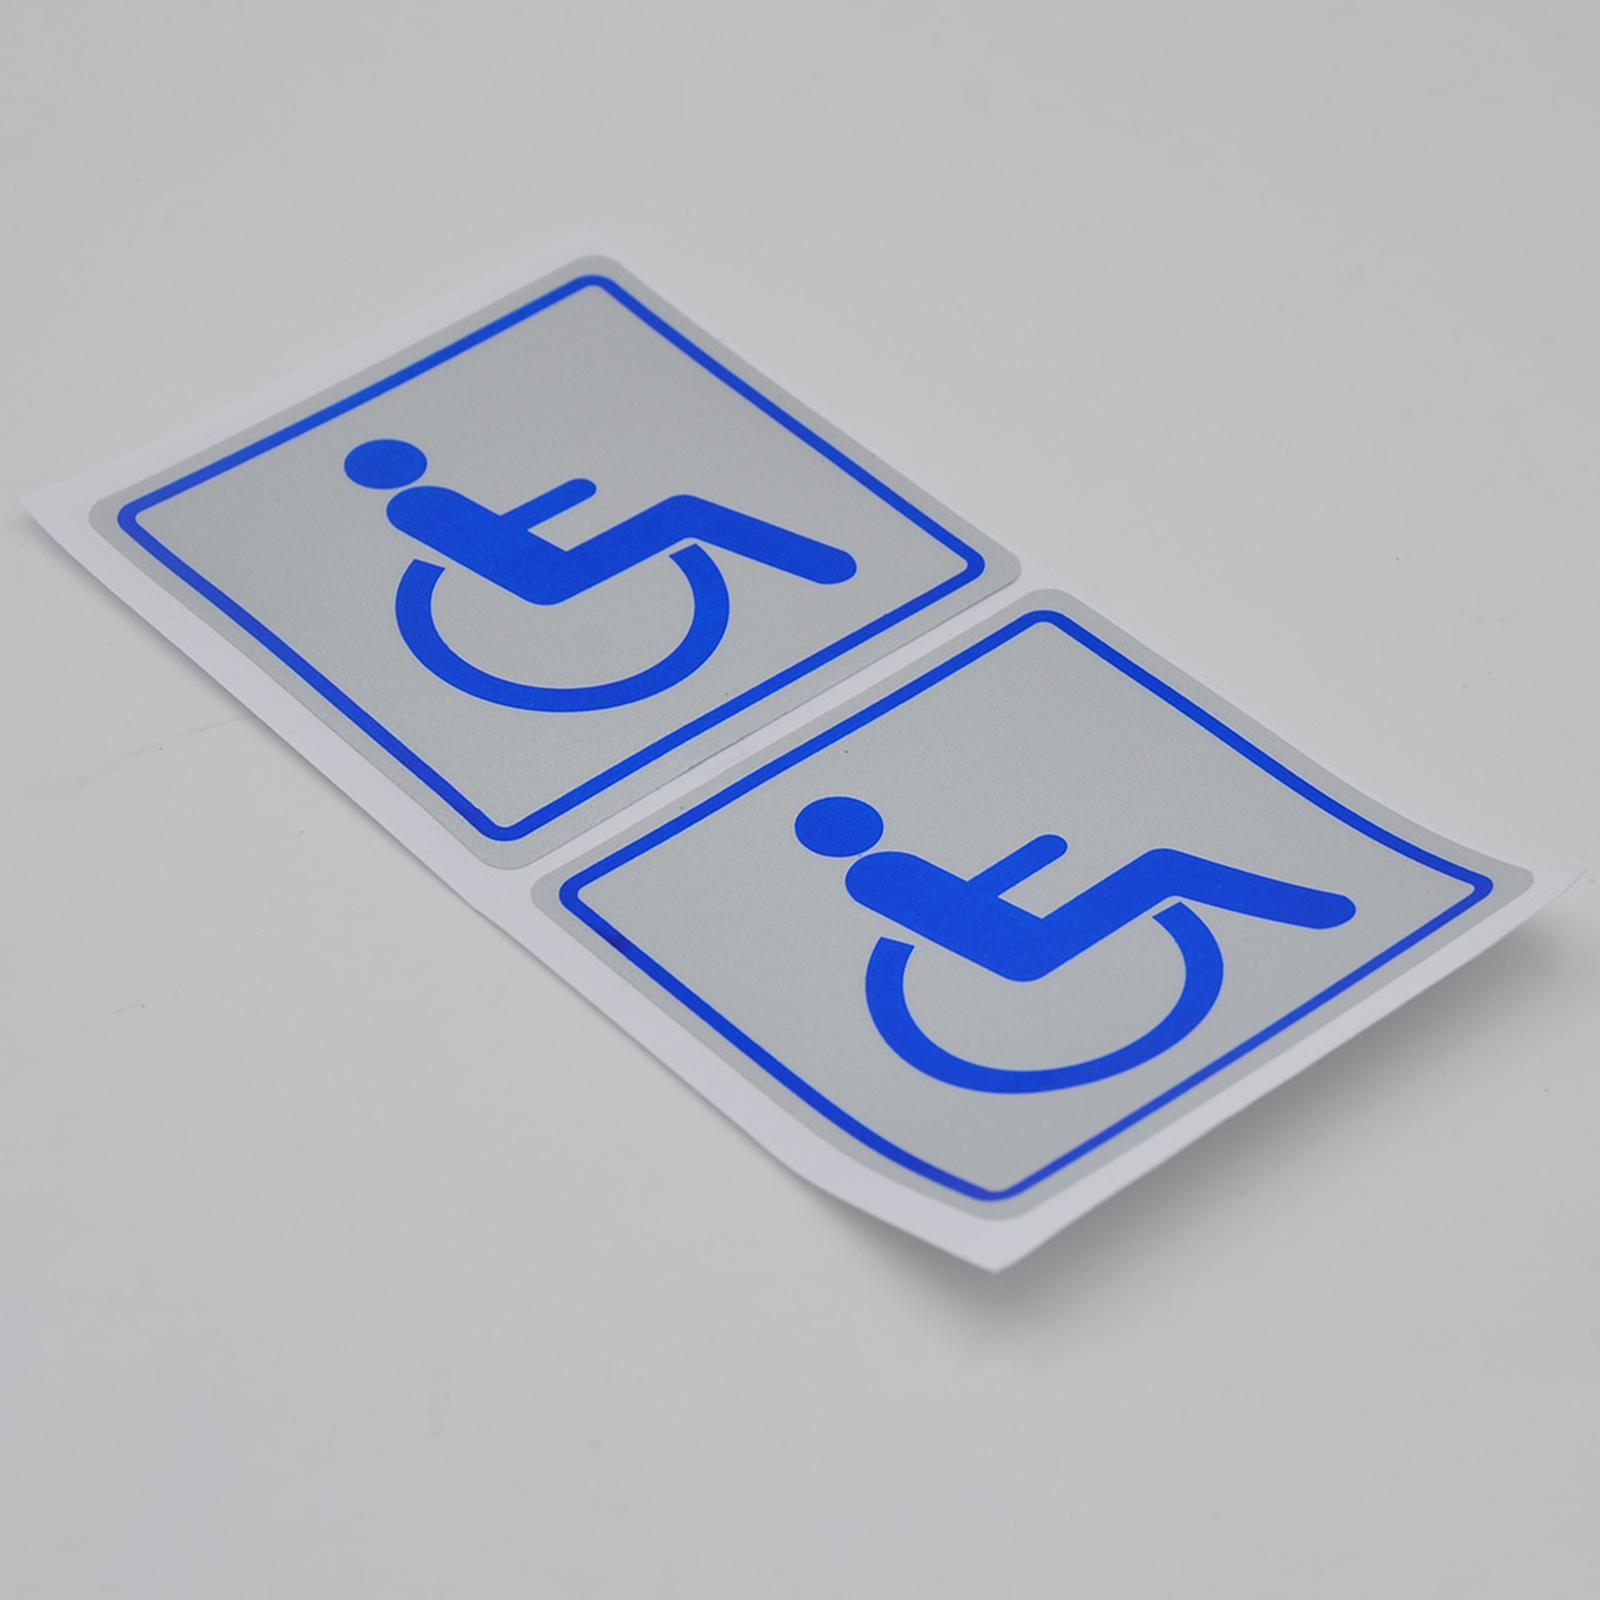 Sign Stickers Self Adhesive Identification Sign Supplies for Work